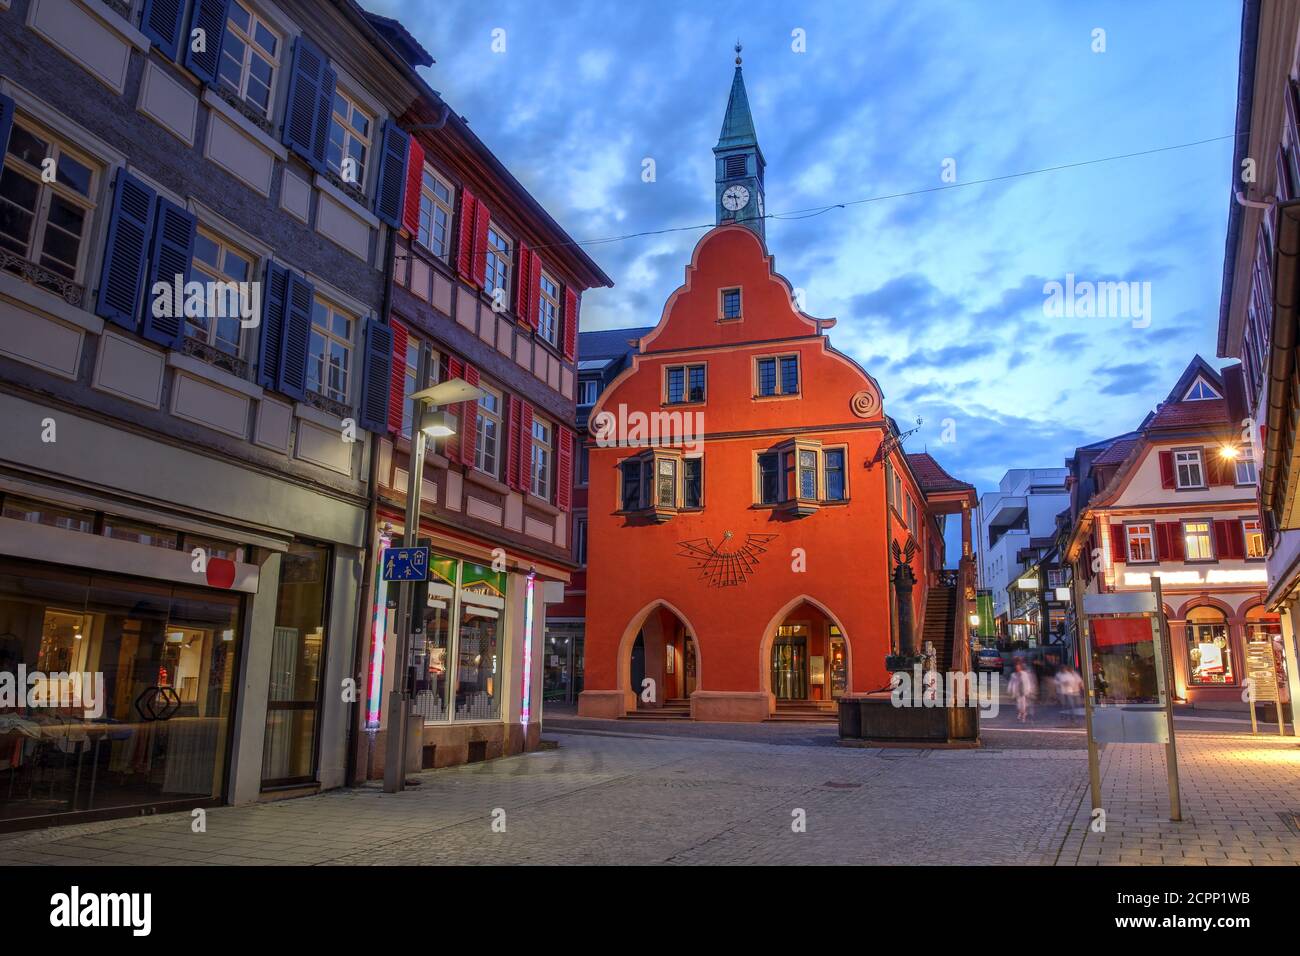 Twilight scene in the small town of Lahr in the Black Forest, Germany (province of Baden Wurttemberg) with focus on the red building of the Town Hall. Stock Photo